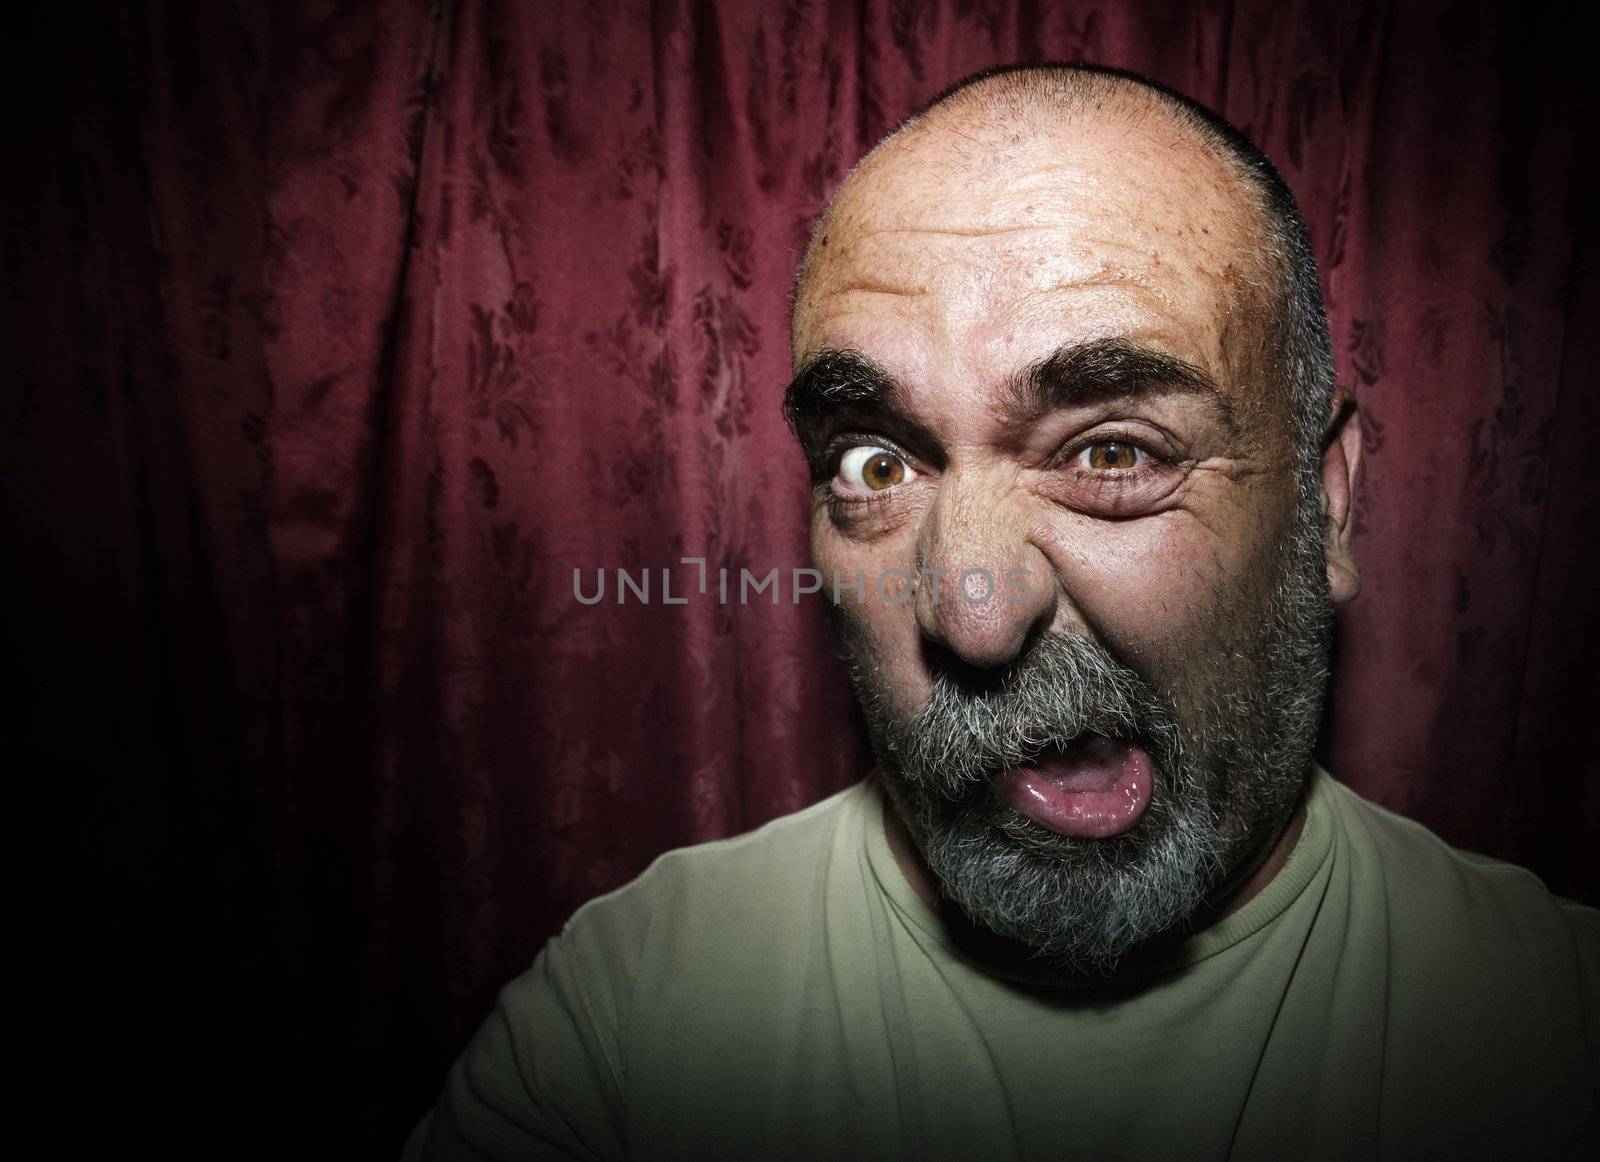 Man making a funny face in front of red curtains by Creatista